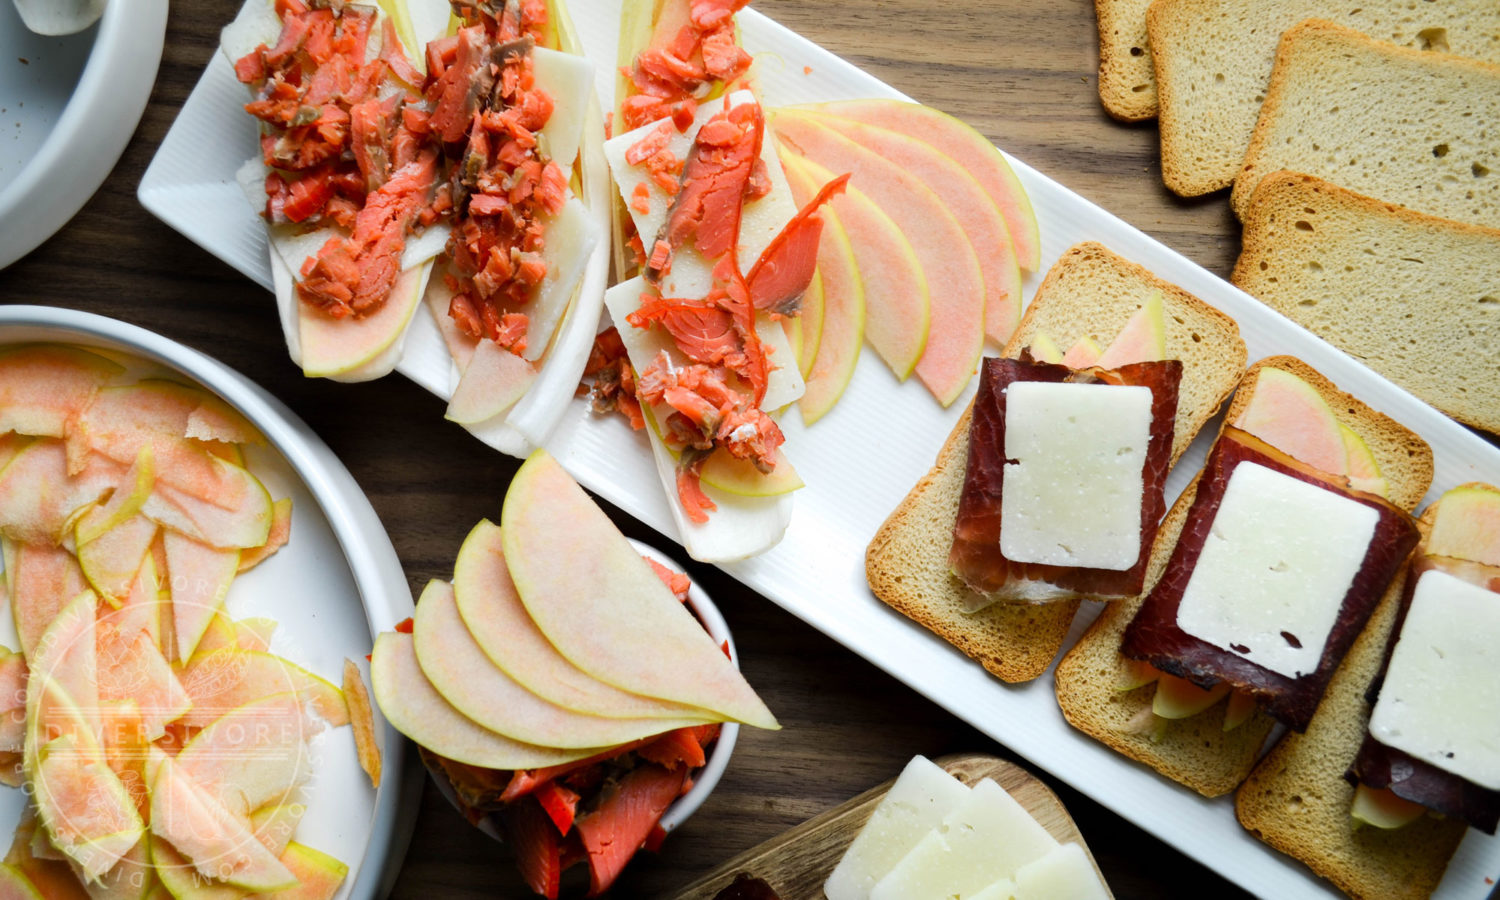 Pink Pearl apples and a charcuterie board with manchego, bison bresaola, smoked salmon, and endive - Diversivore.com